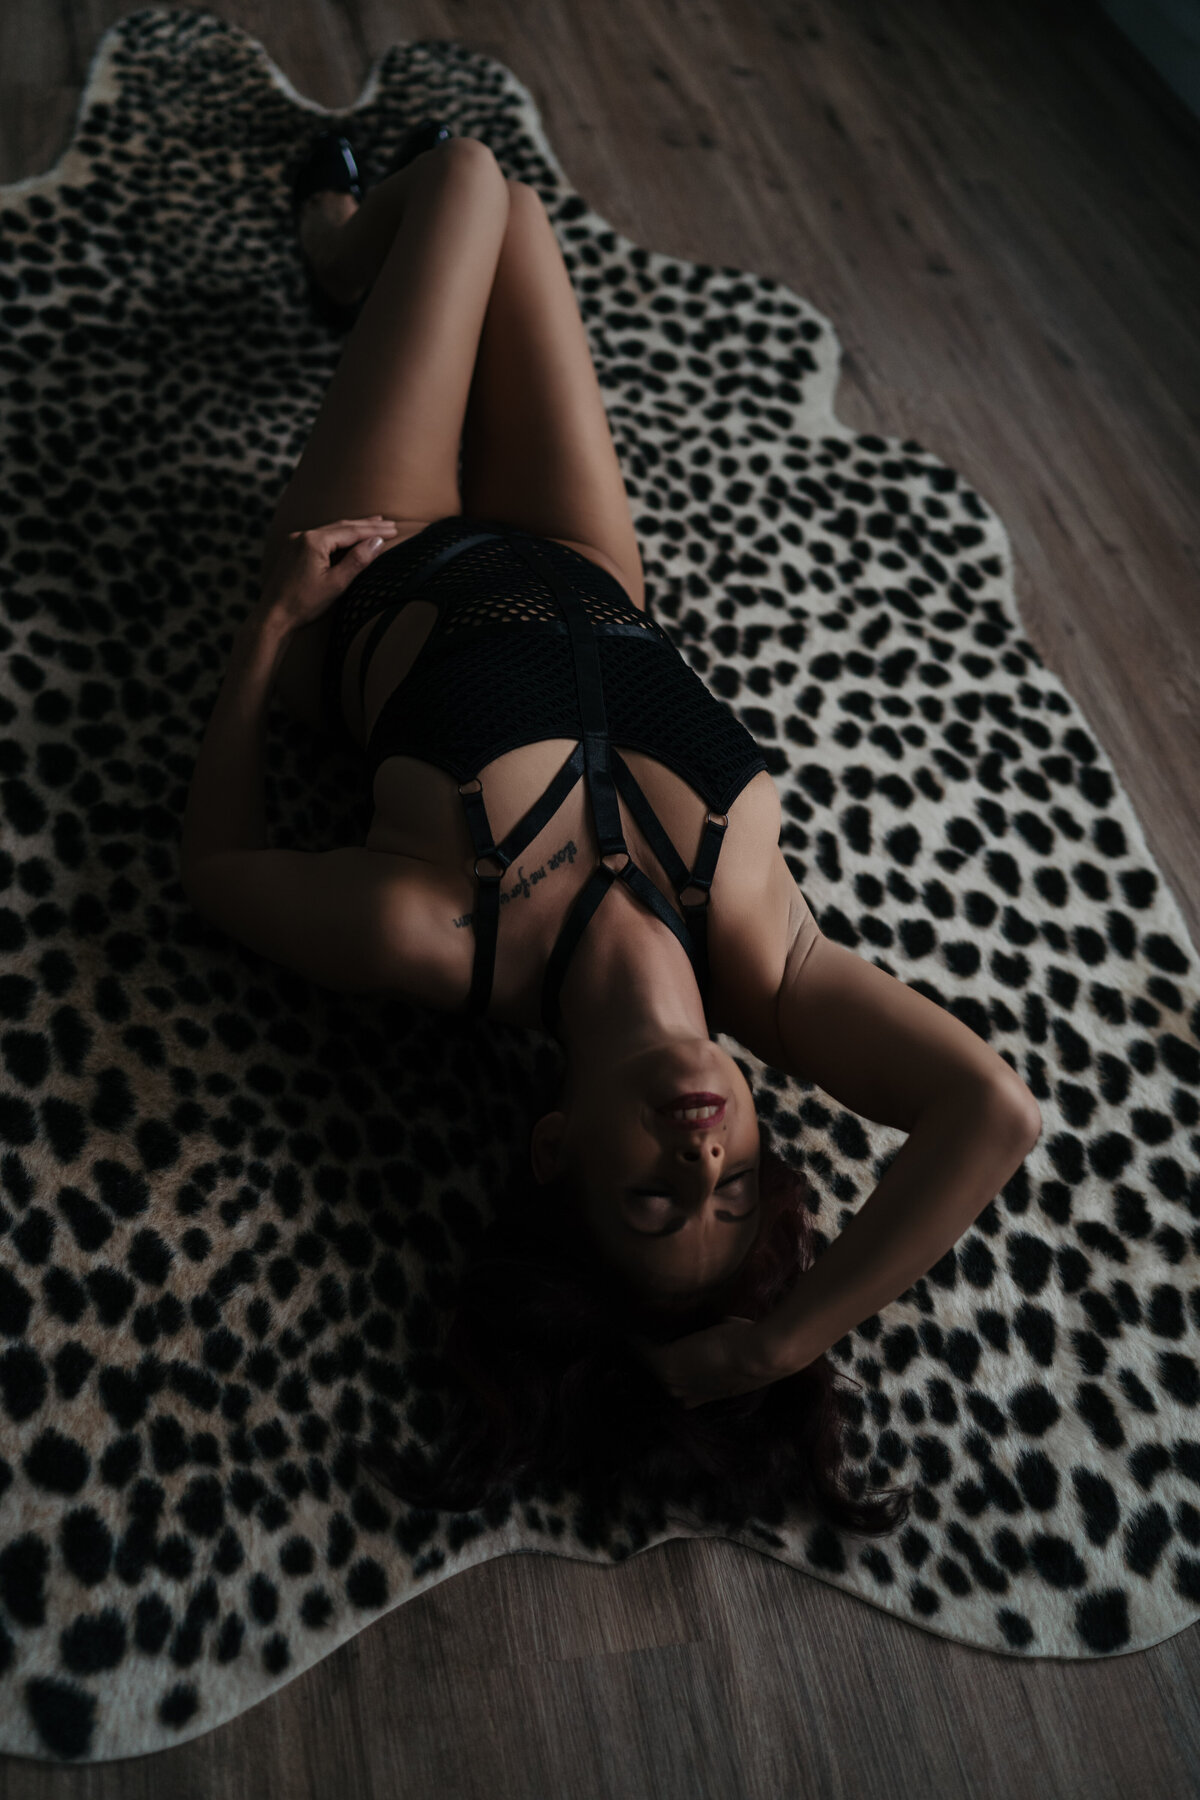 A woman wearing black lingerie arches her back and runs a hand through her hair while laying on a leopard print run on wood floor while posing for a boudoir photography session with Kerry Callahan in Boston